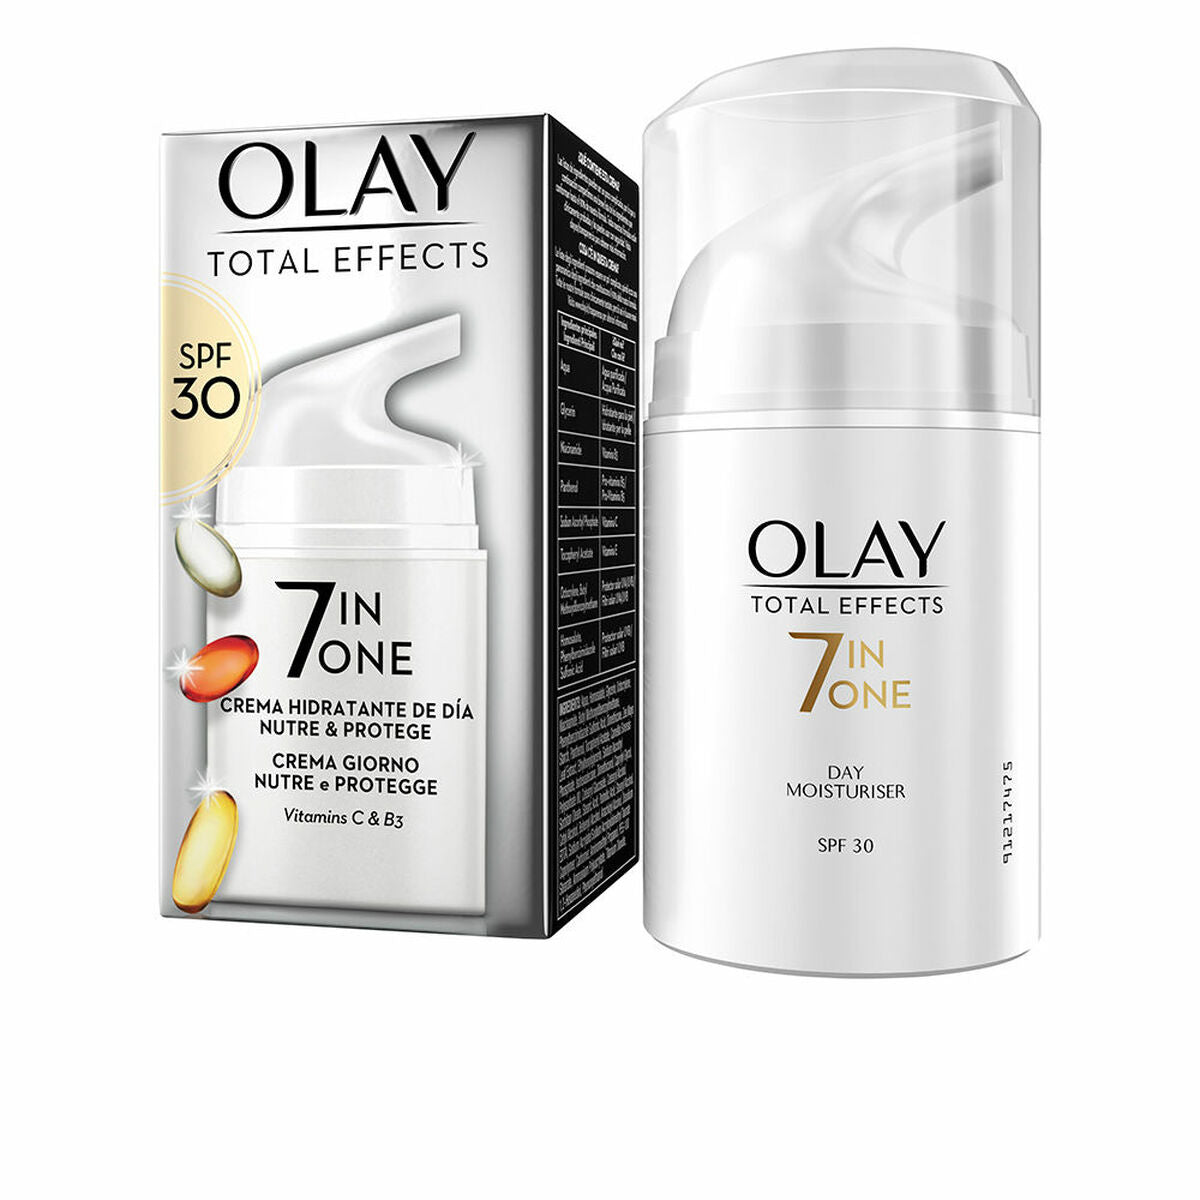 Moisturising Day Cream Olay Total Effects 7-in-1 Nutritional 50 ml Spf 30 | Olay | Aylal Beauty